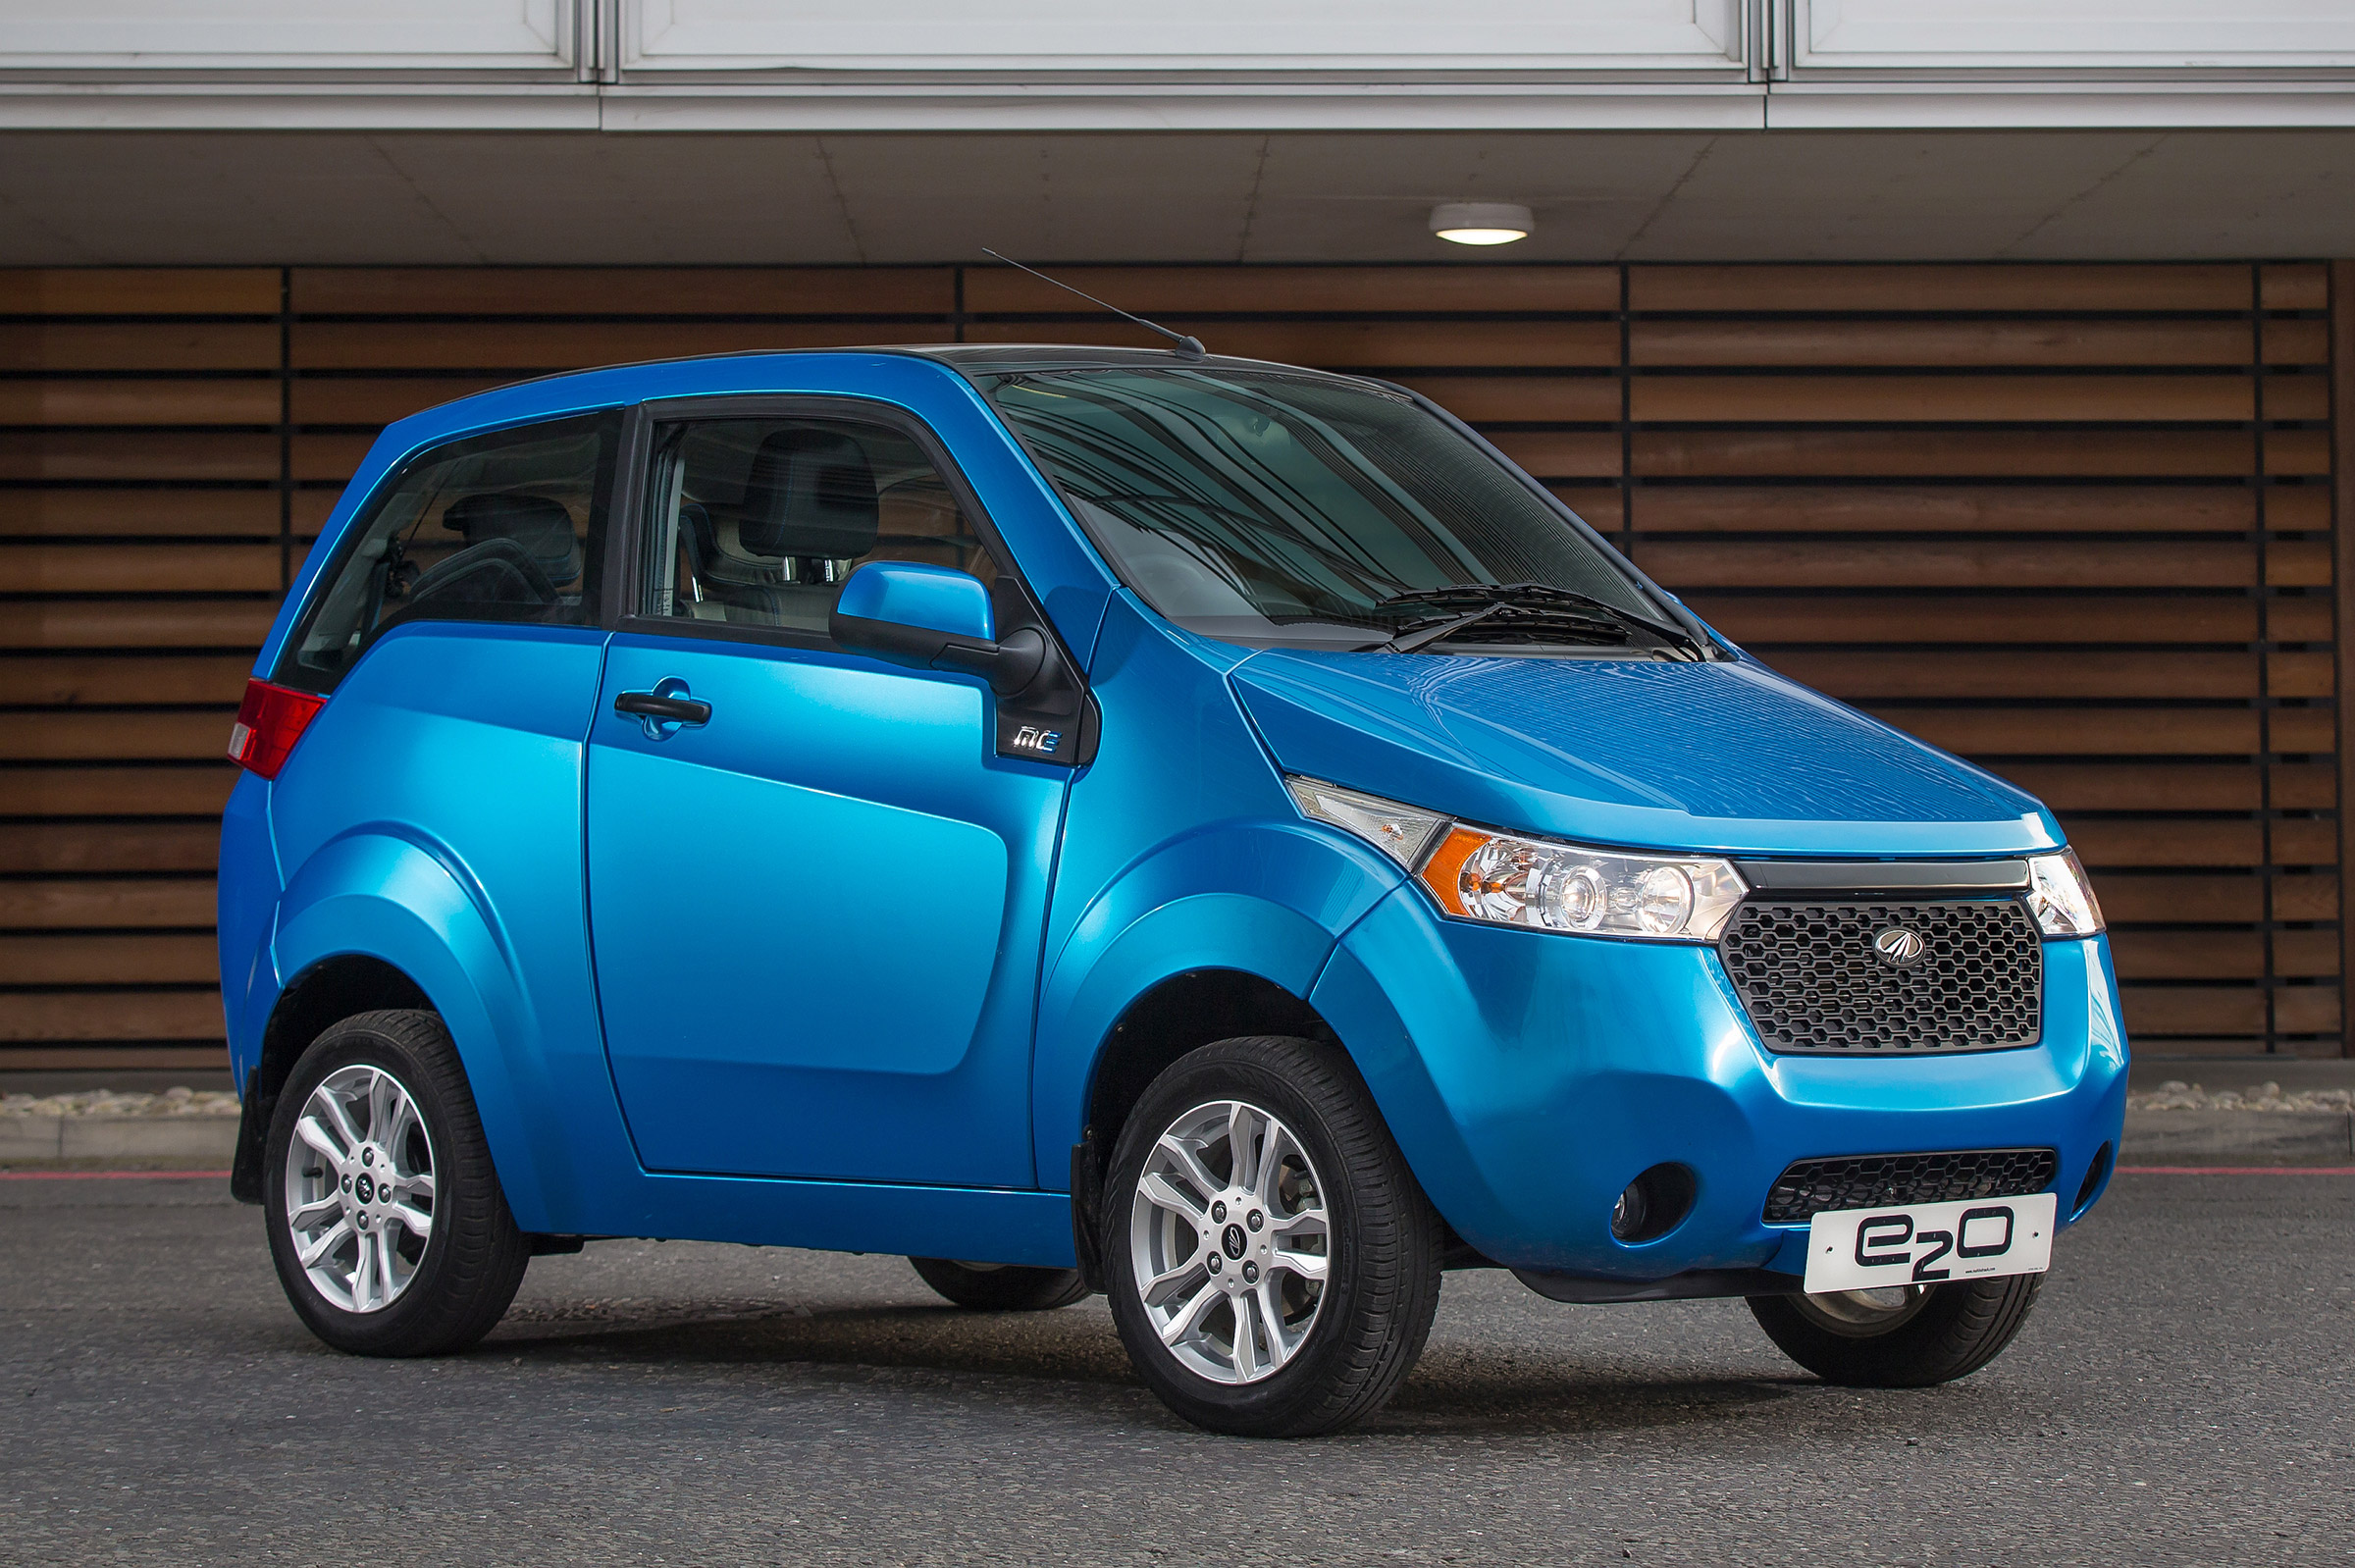 Mahindra e2o electric city car pulled from UK sales | Auto Express